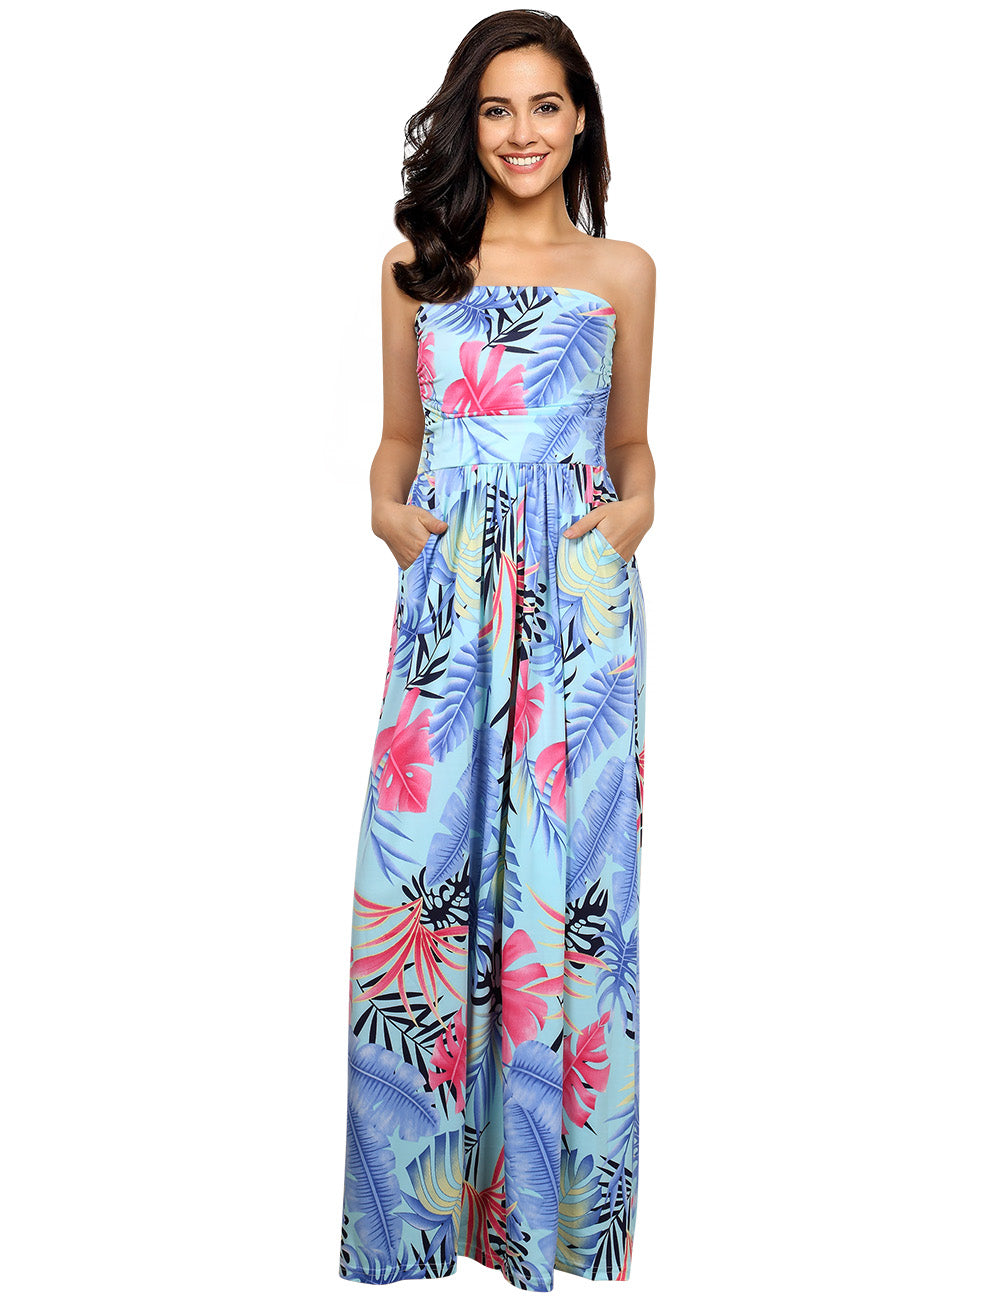 YESFASHION Women's Strapless Backless Summer Tropical Dress